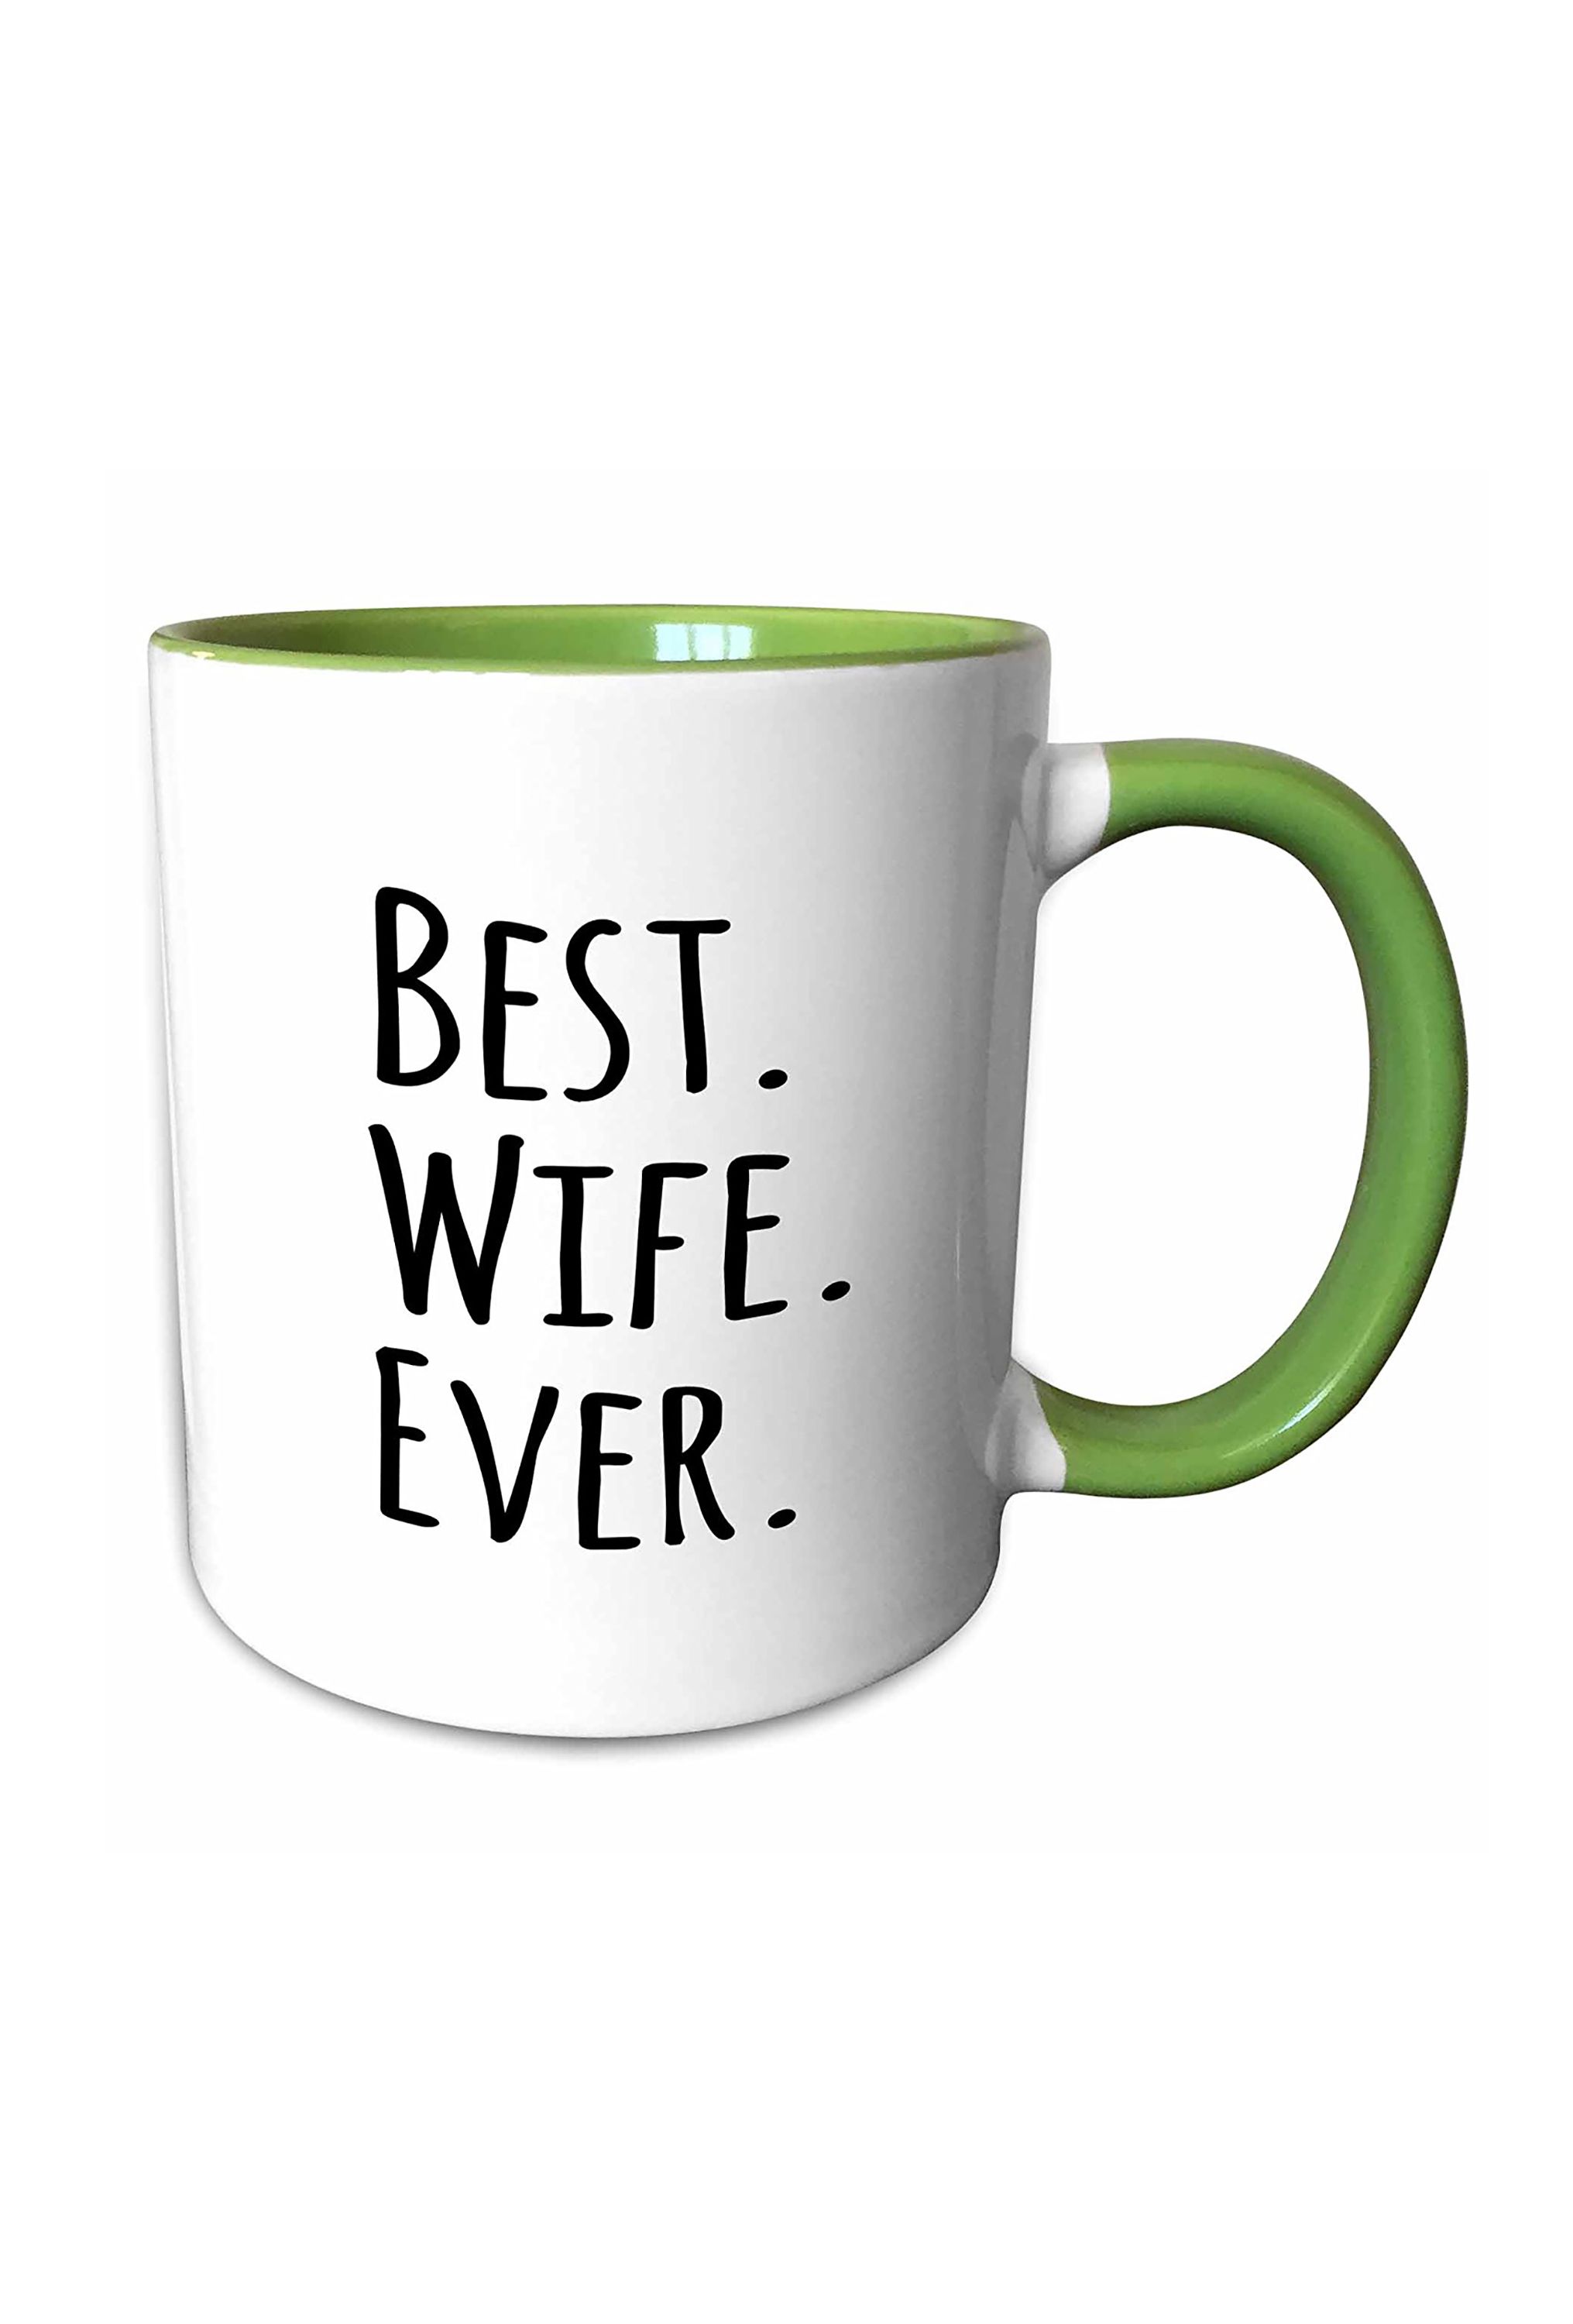 good wedding anniversary gifts for wife